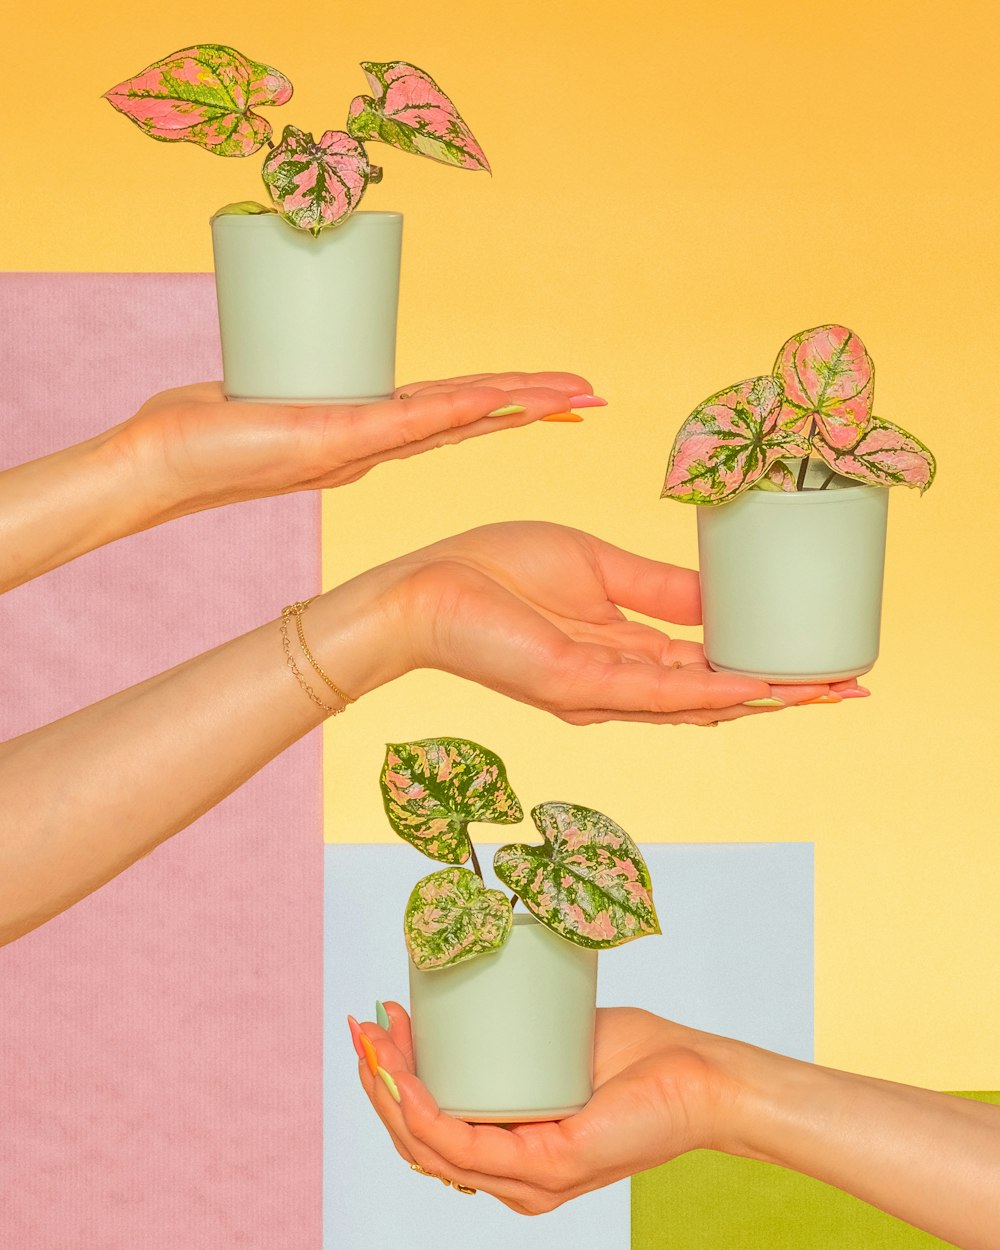 two hands holding small potted plants against a multi - colored background